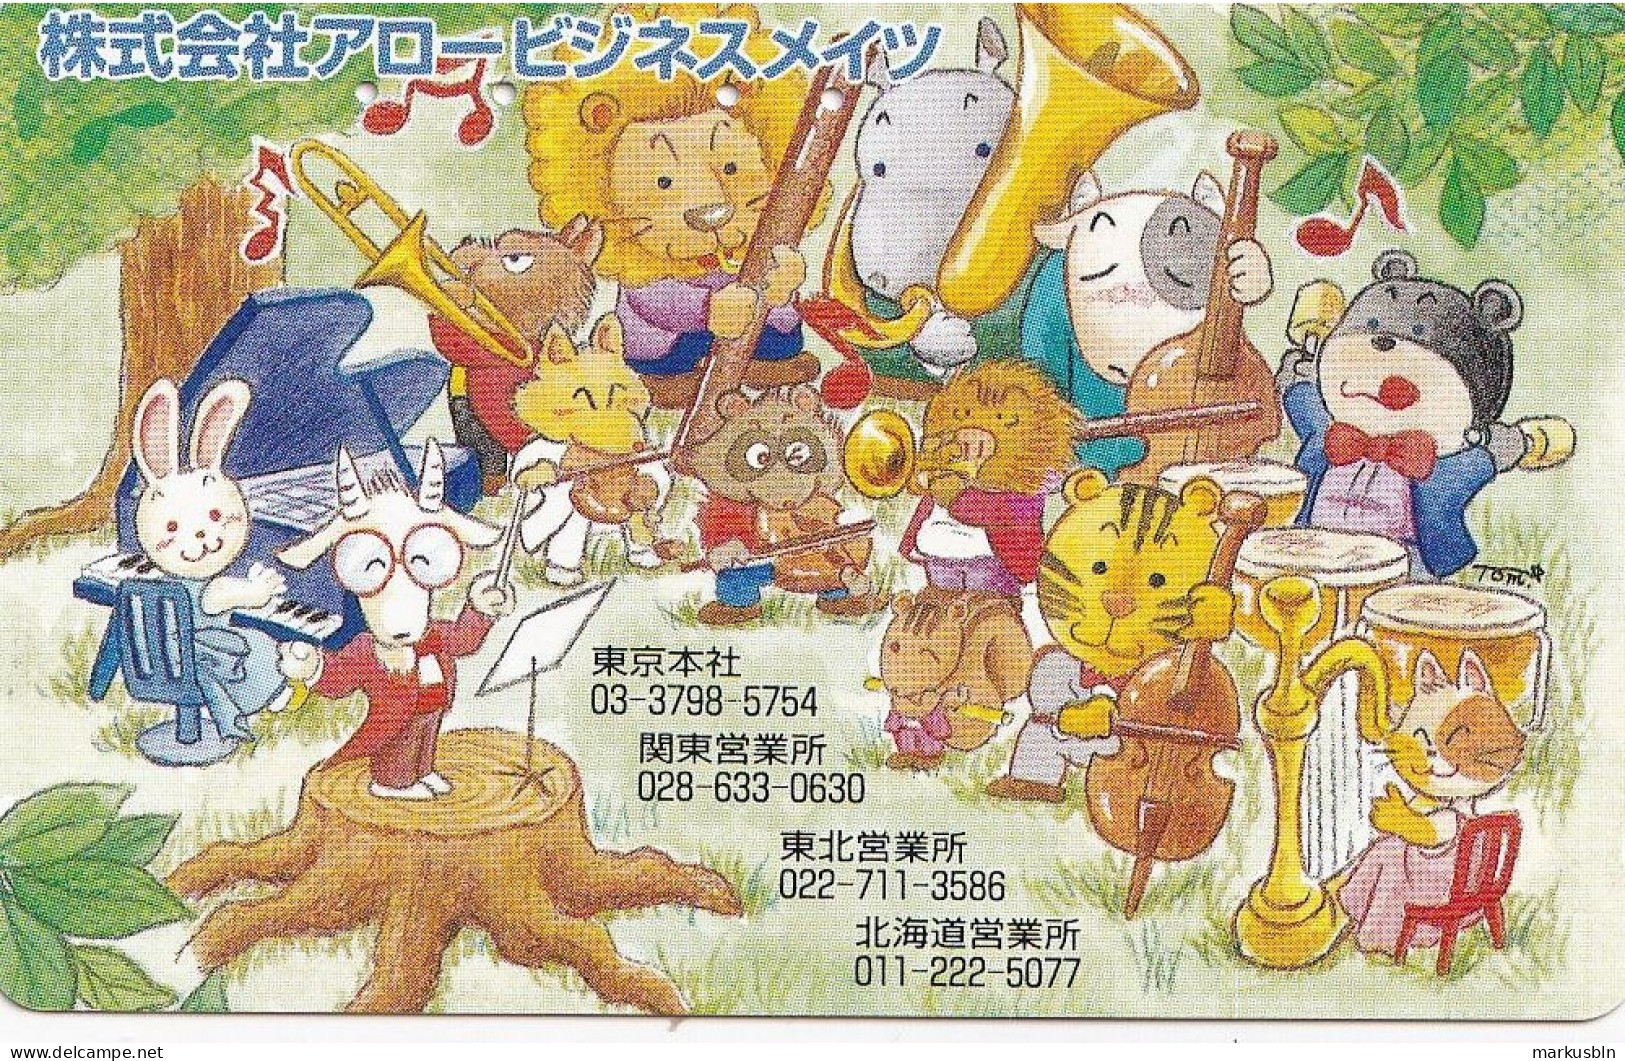 Japan Tamura 50u Old Private 110 - 016 Drawing Music Rabbit Racoon Tiger Hippo Lion Orchestra - Japan